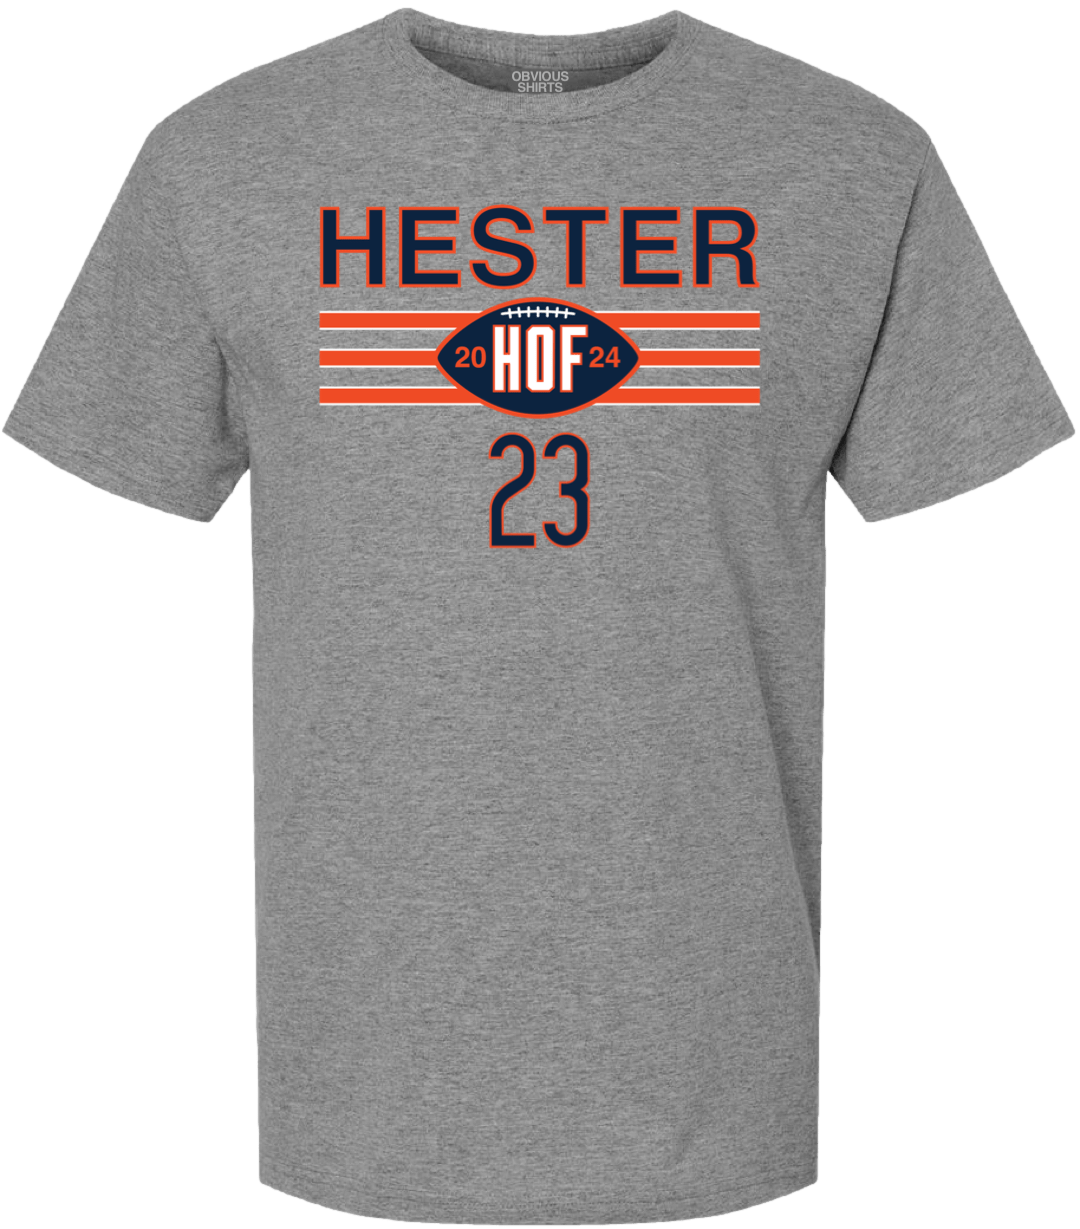 DEVIN HESTER HALL OF FAME 2024. - OBVIOUS SHIRTS